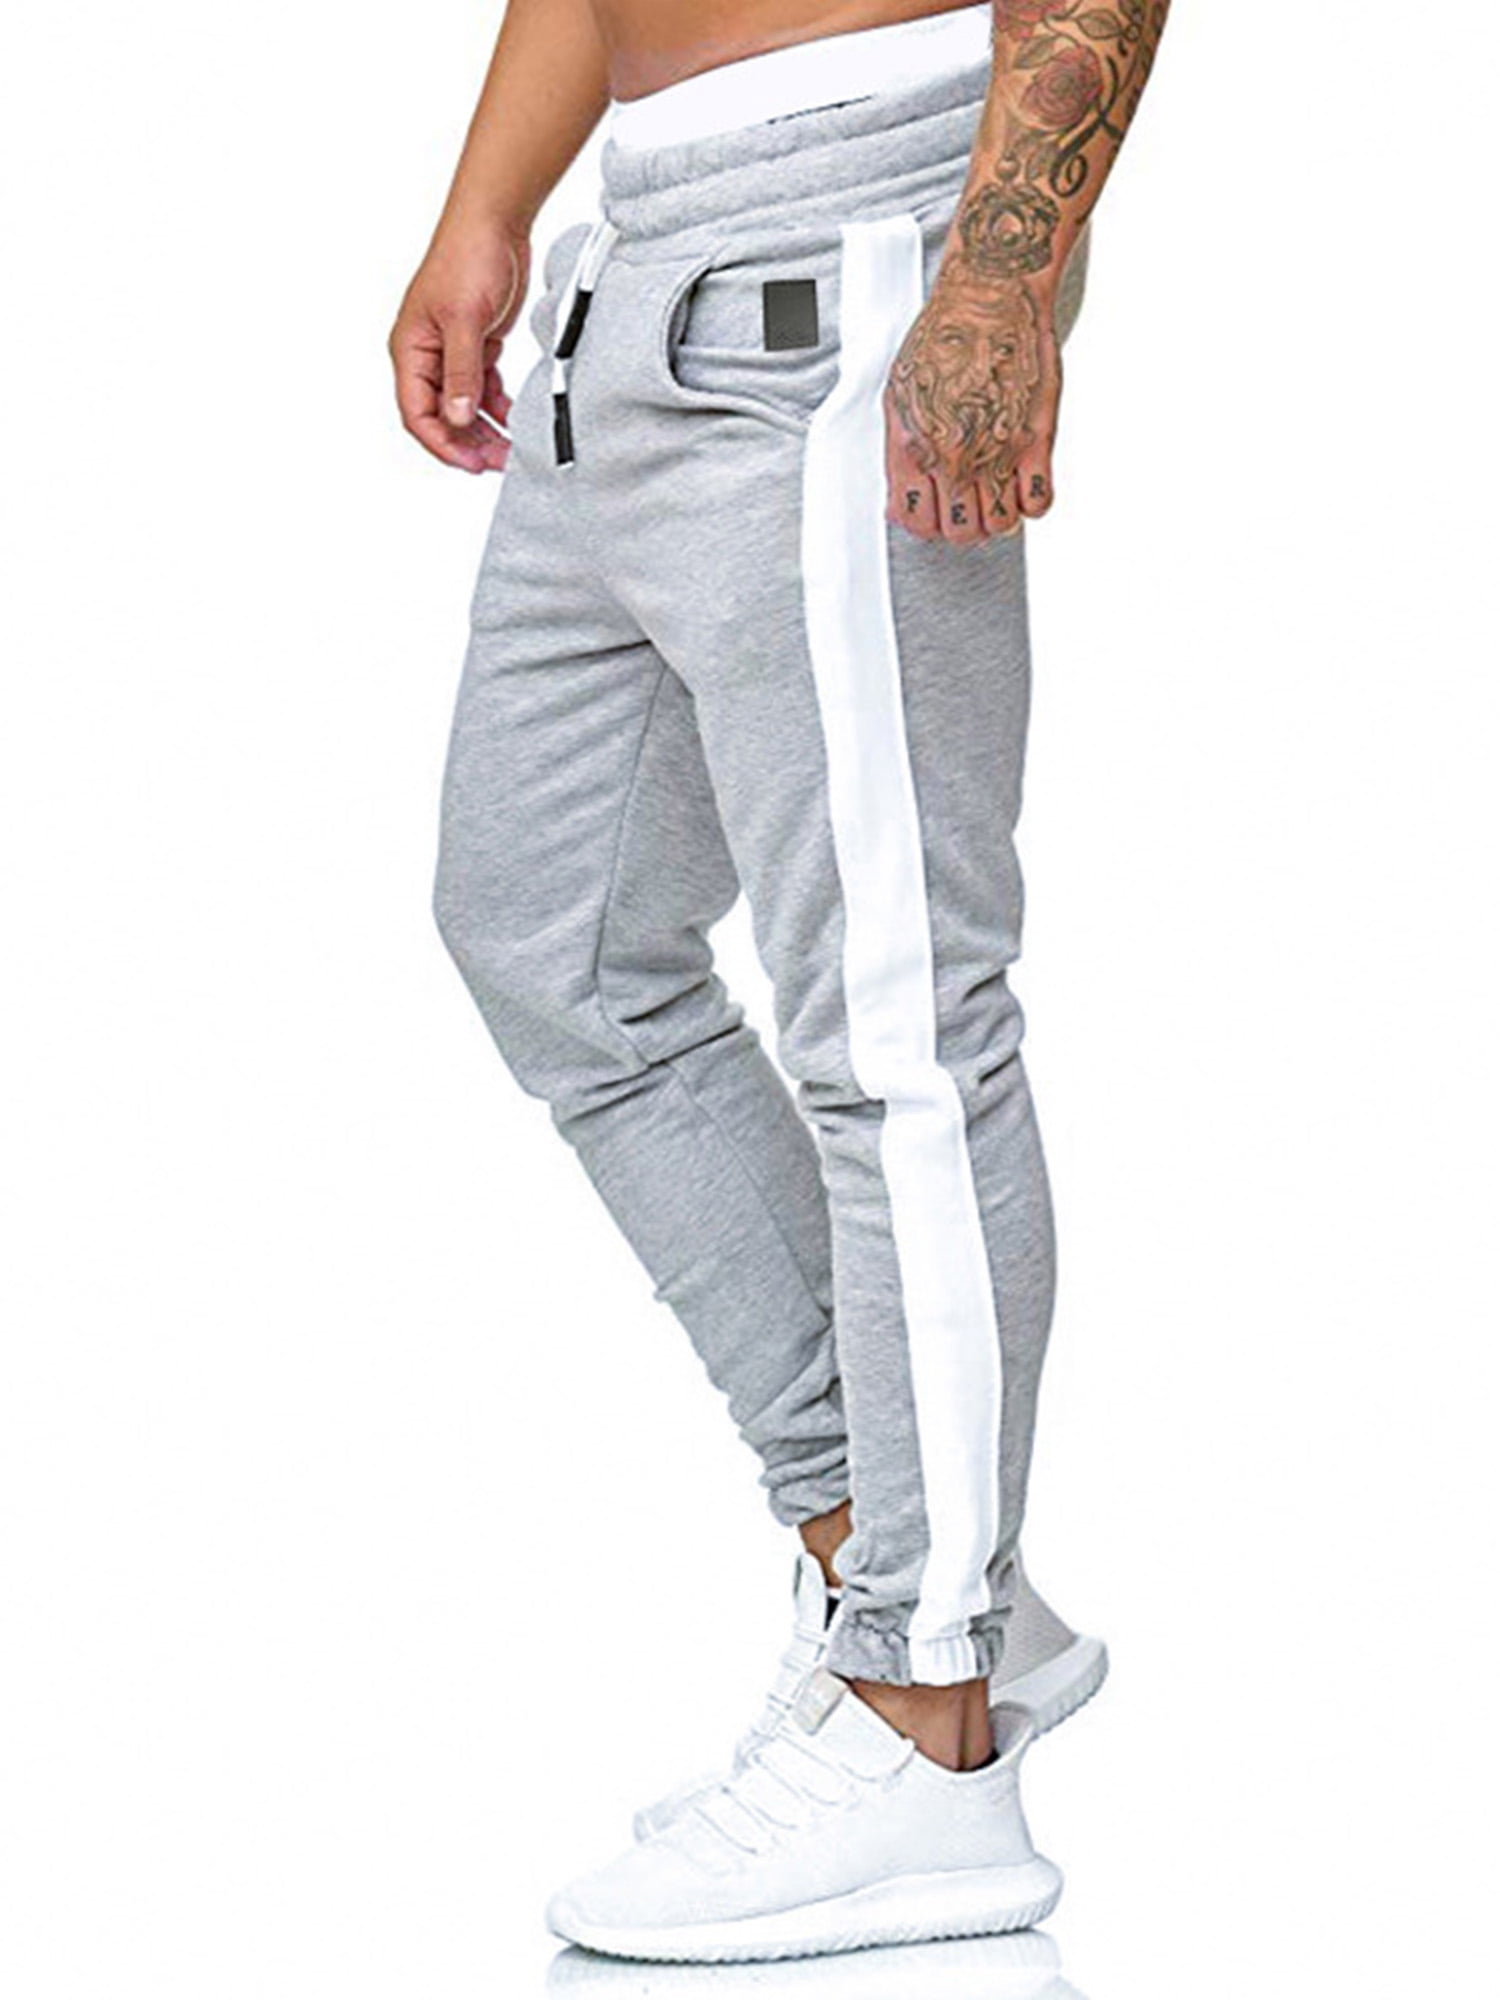 Mens Fleece Tracksuit Bottoms Gym Sports Pants Jogging Jogger Running Trousers 